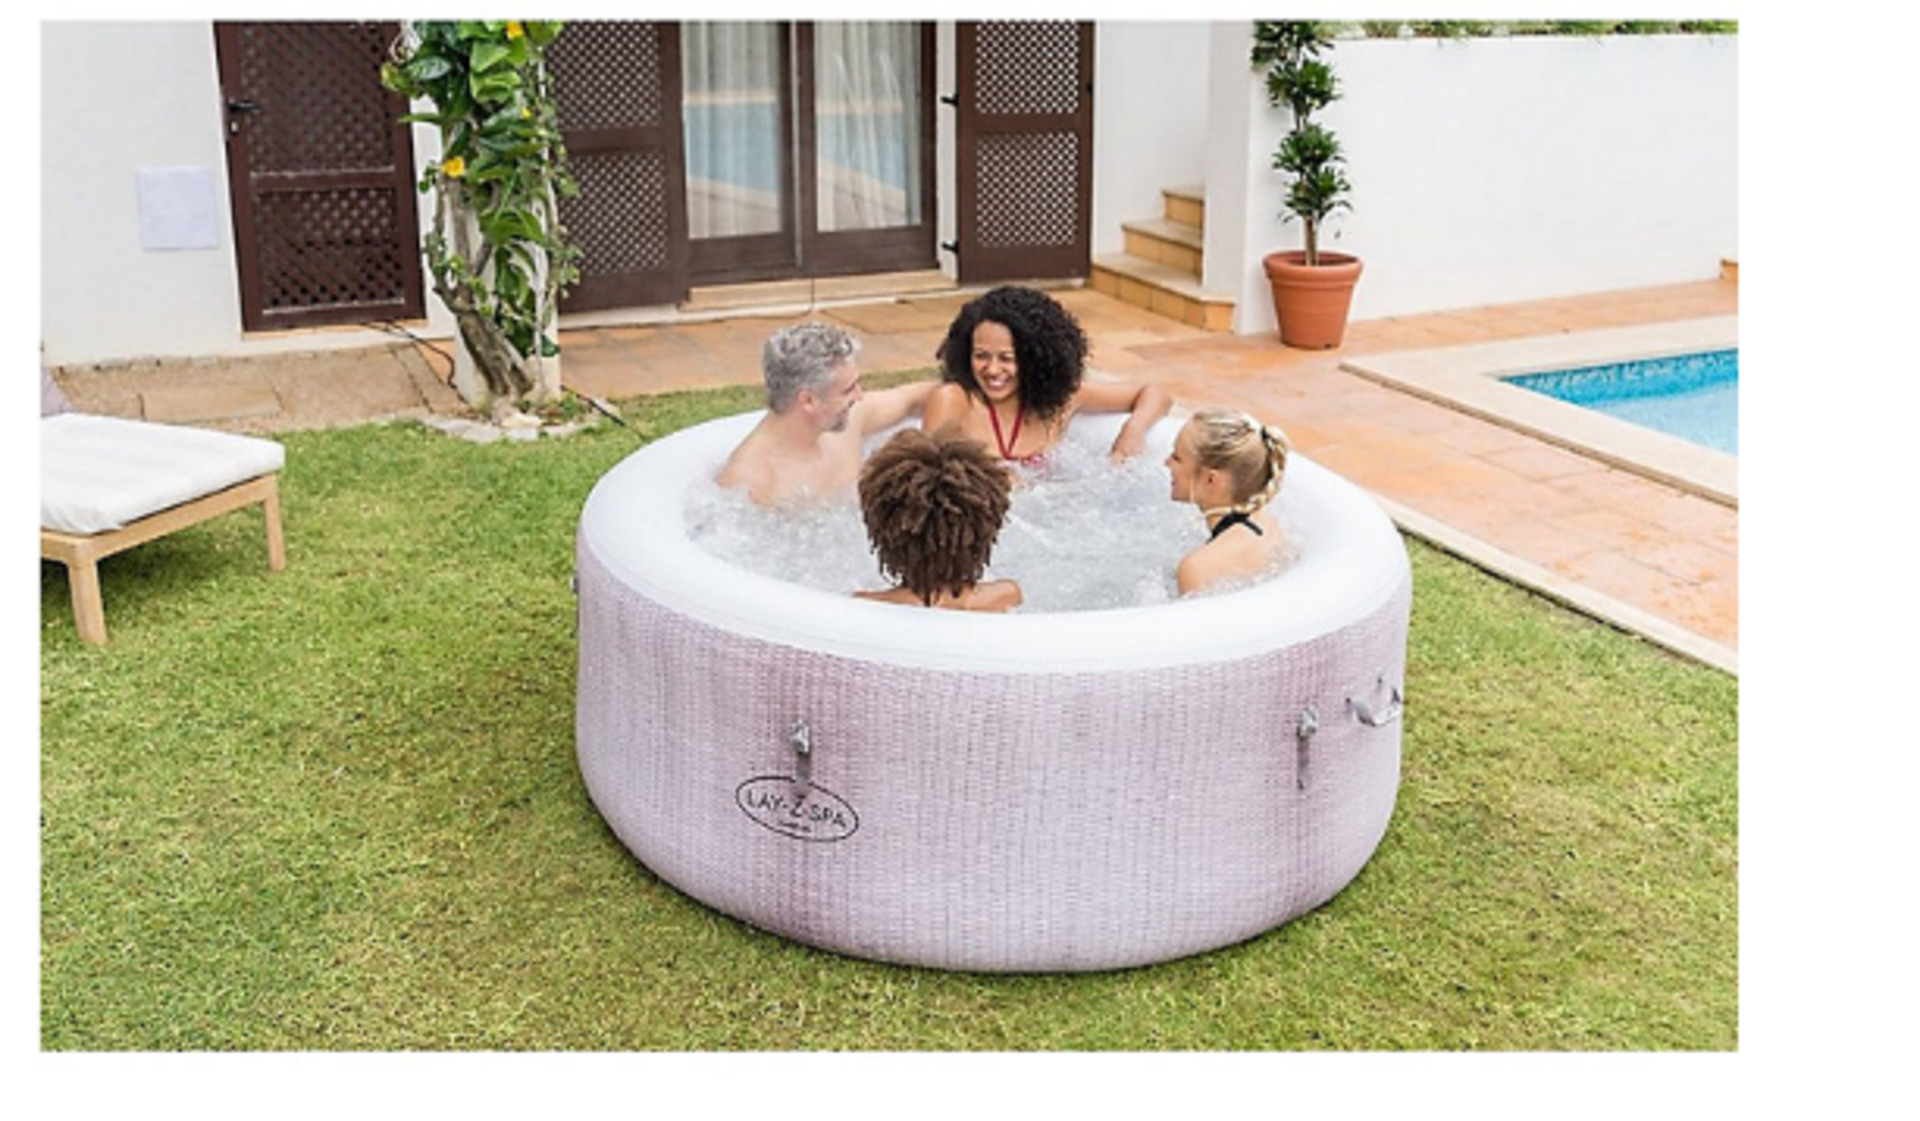 Lay-Z-Spa Cancun AirJet Inflatable Hot Tub. - ER. RRP £555.00. Spacious enough to comfortably seat - Image 2 of 2